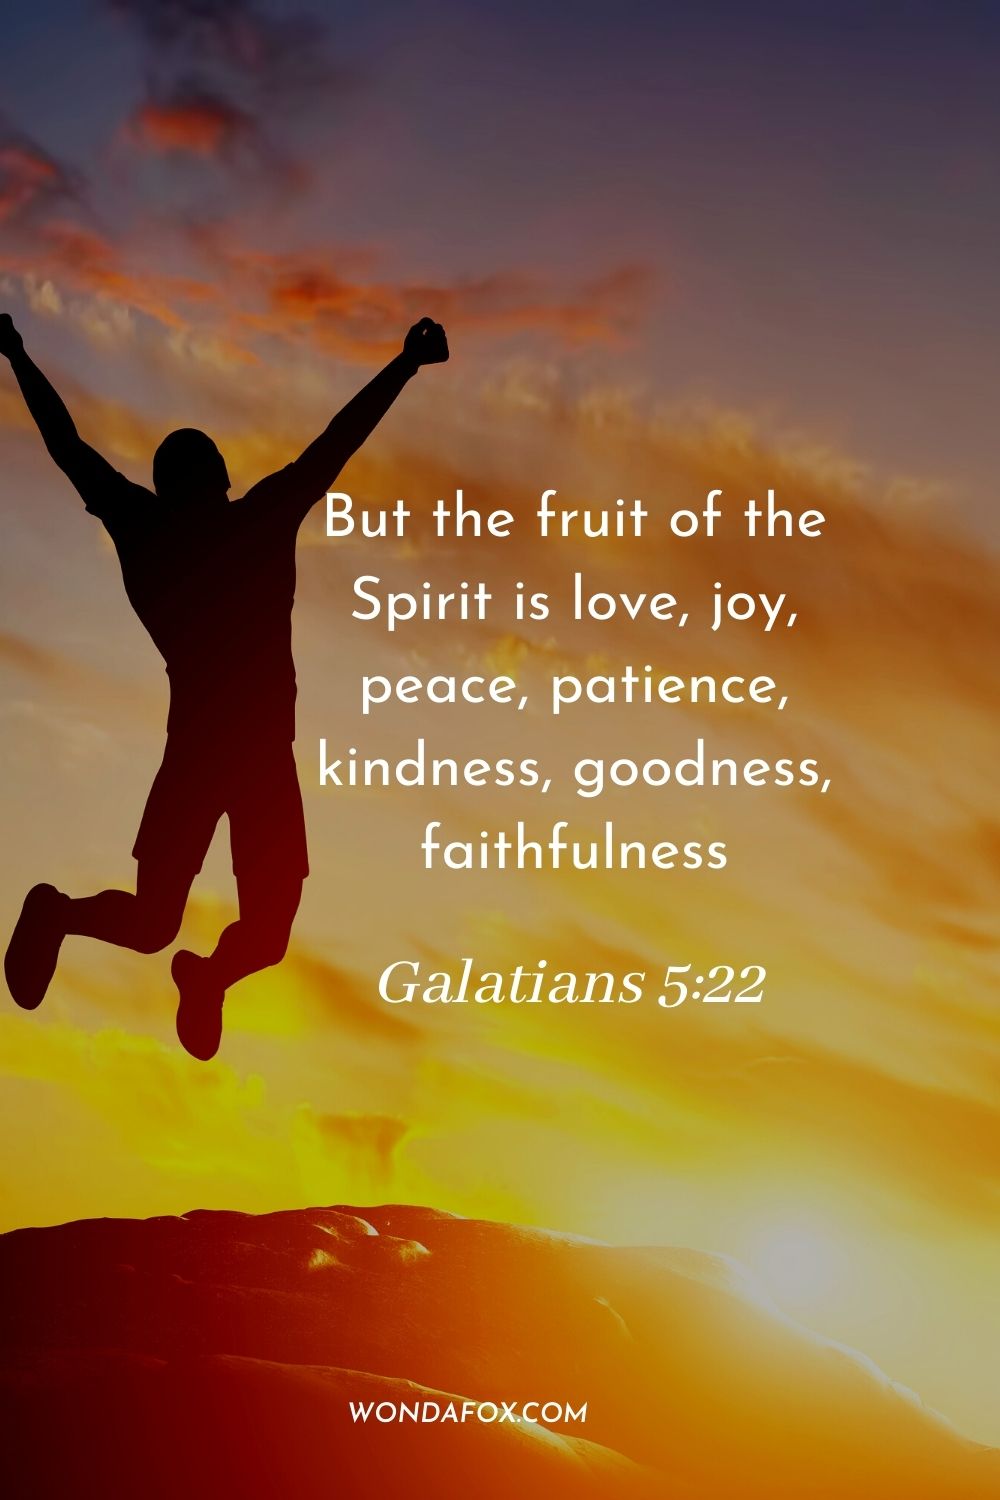 But the fruit of the Spirit is love, joy, peace, patience, kindness, goodness, faithfulness Galatians 5:22